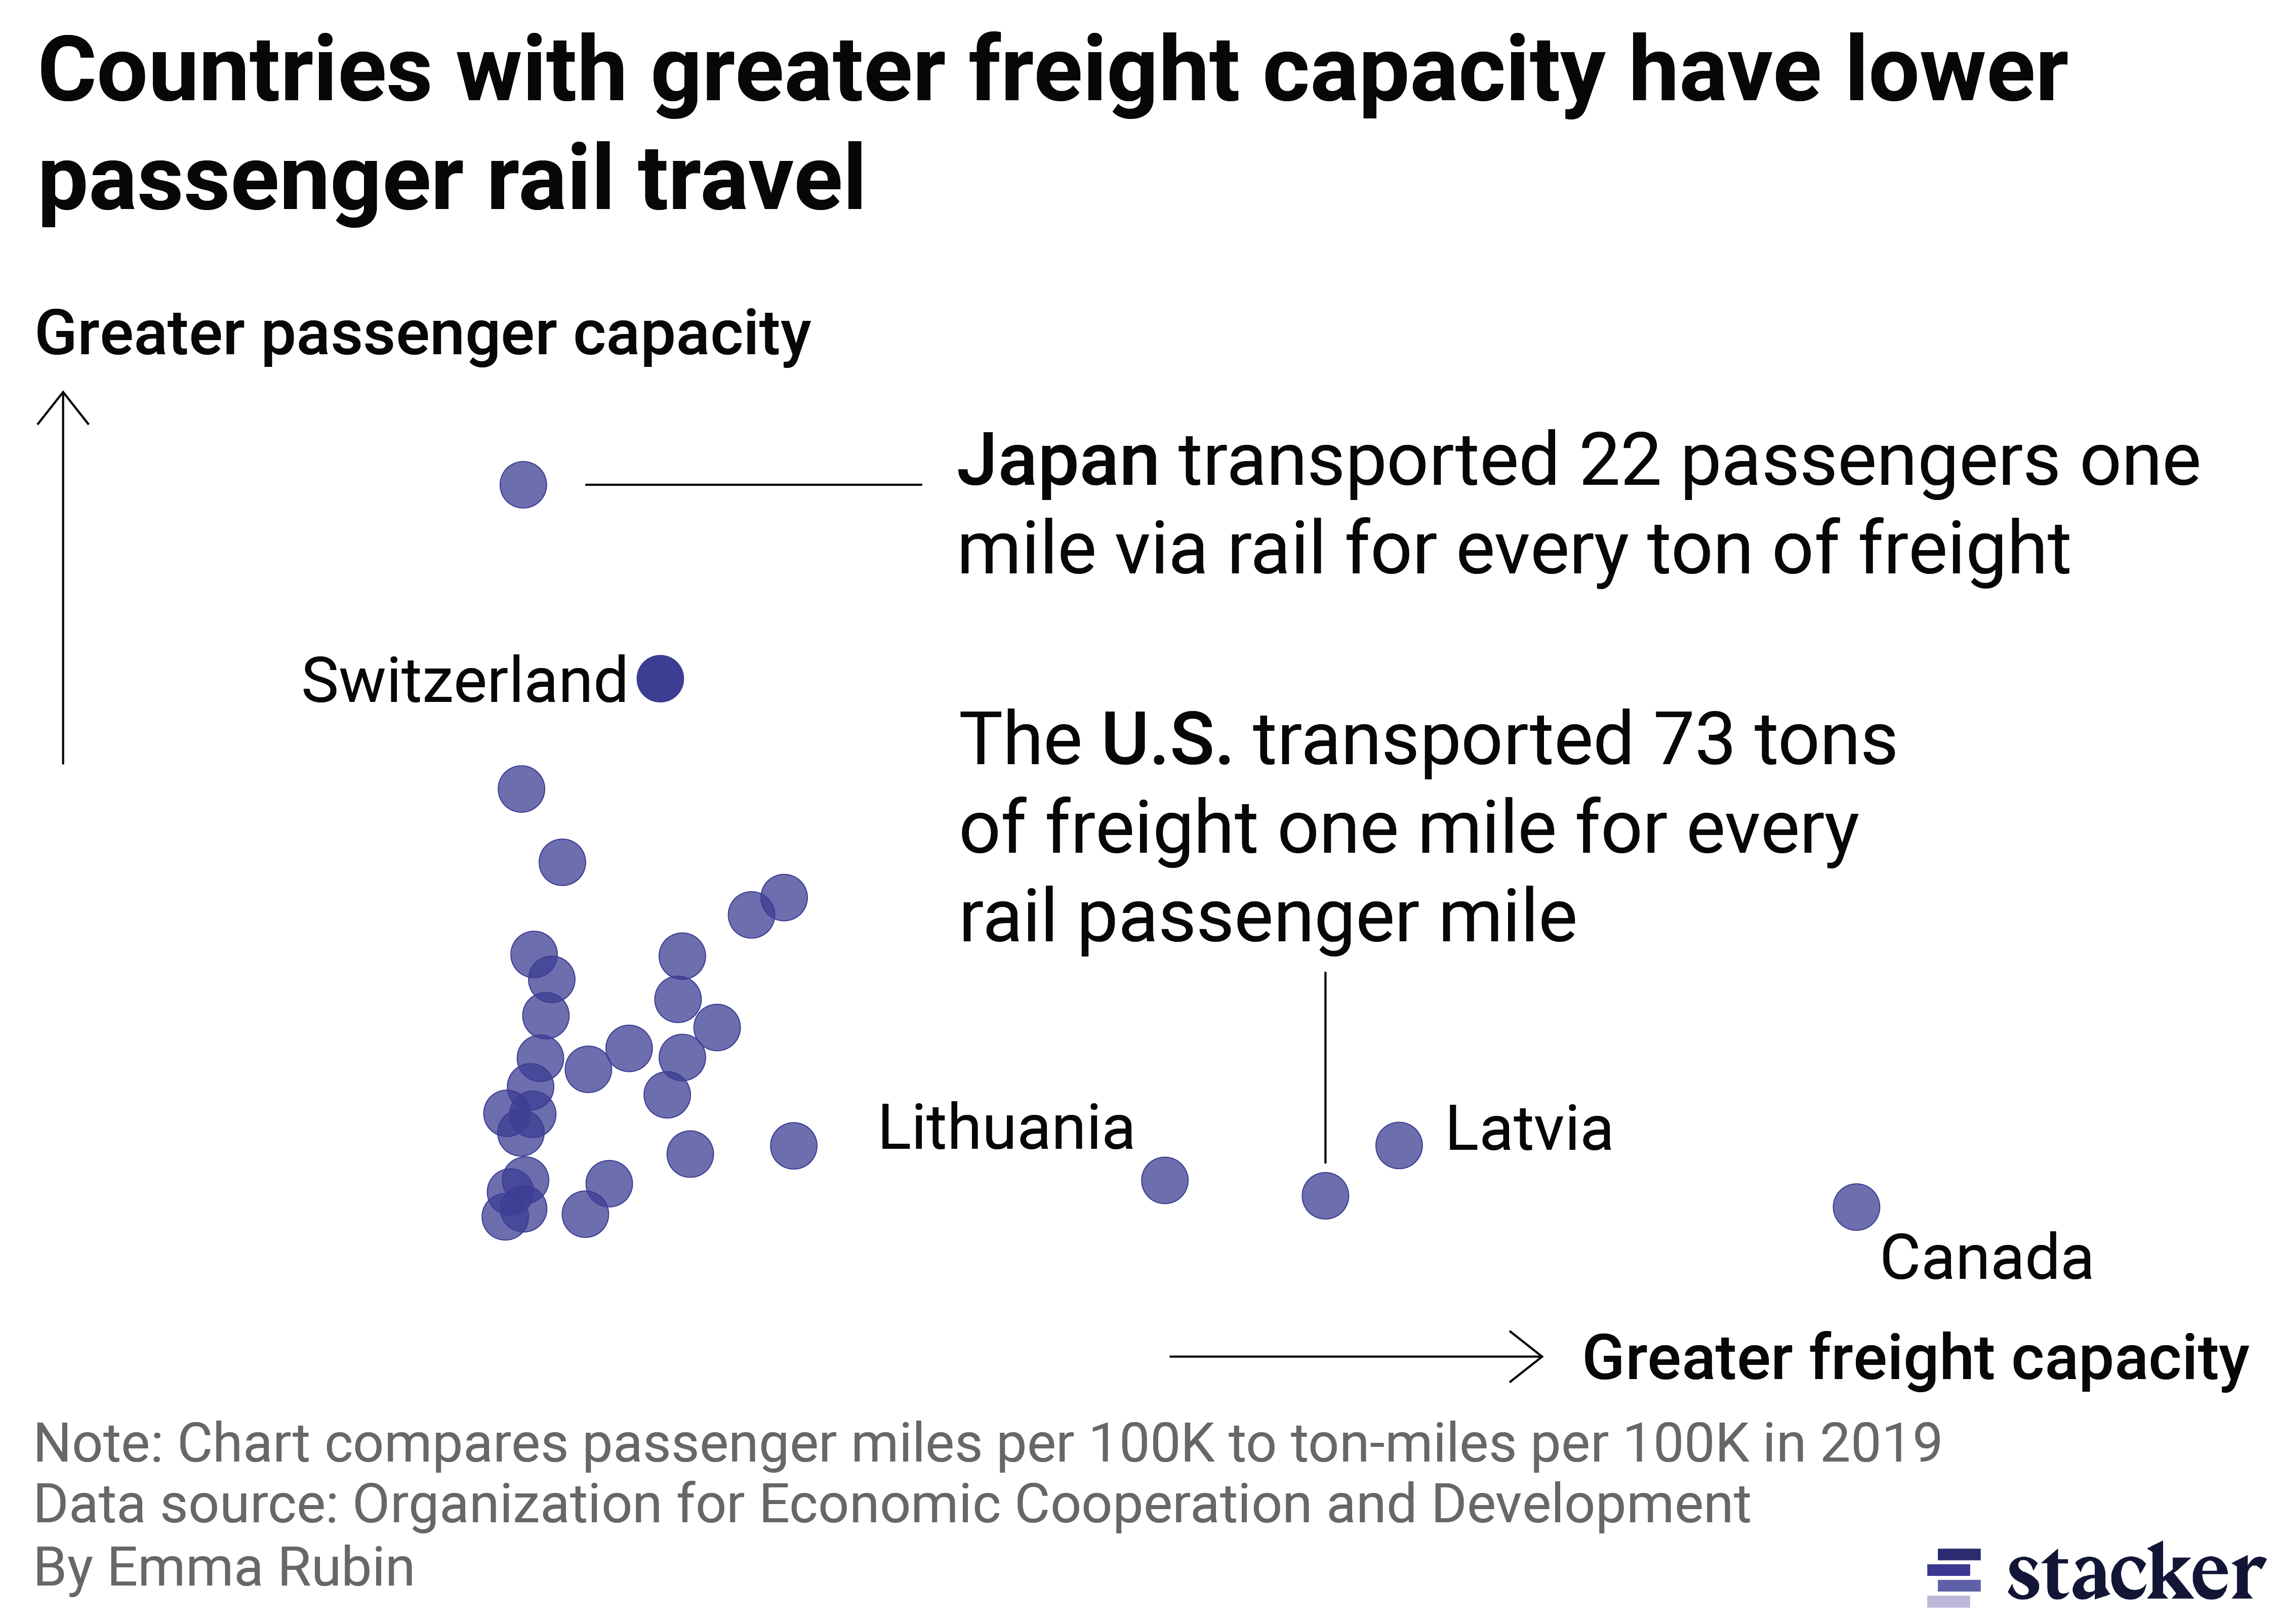 Scatterplot showing relationship between freight rail service and passenger rail service. Countries which ship more freight over rail tend to have less passenger service.